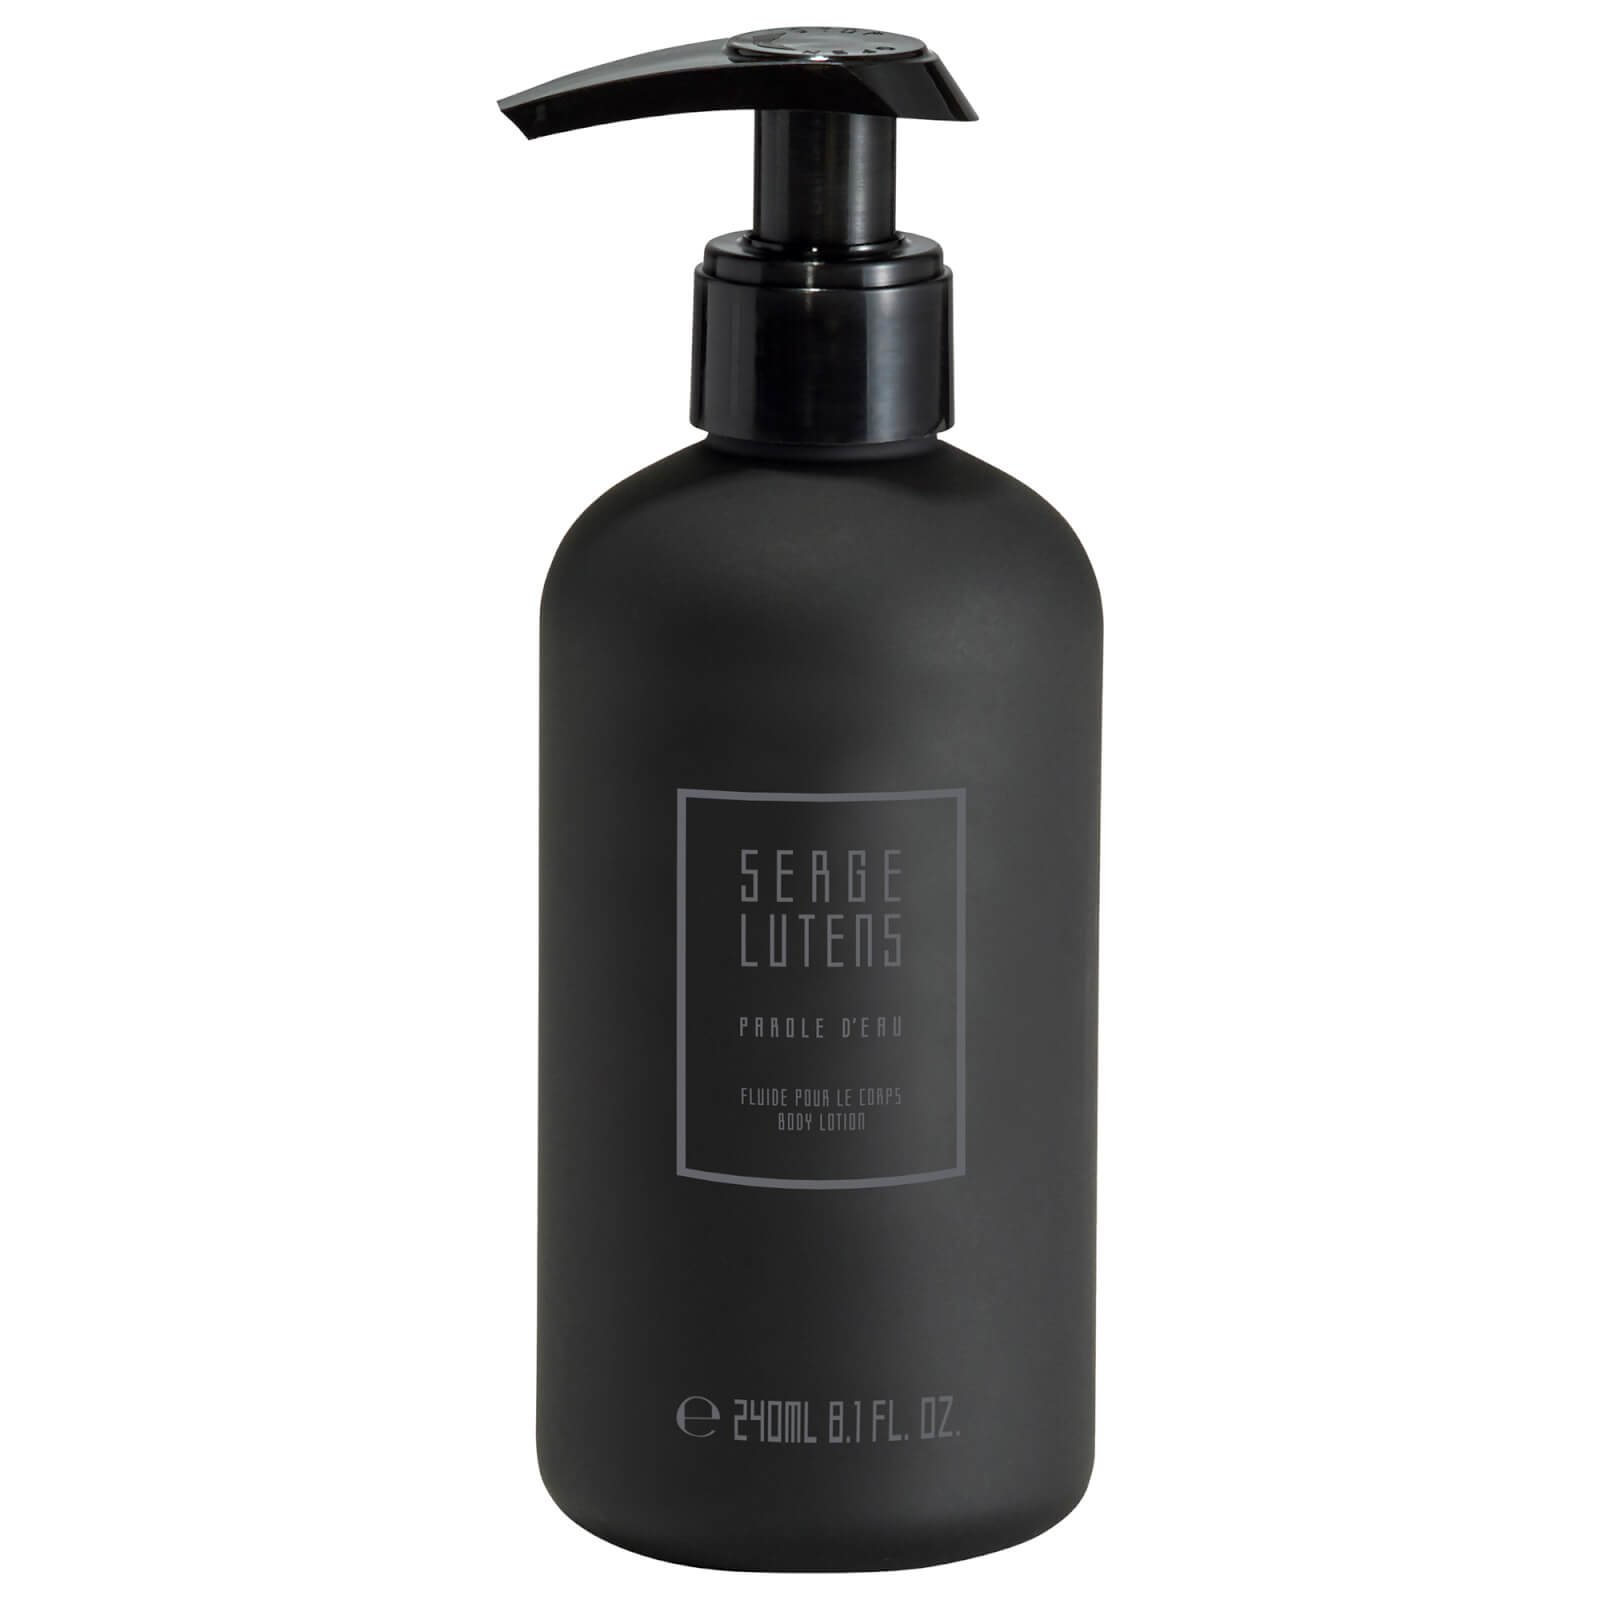 Image of Serge Lutens Matin Lutens Parole Deau Hand and Body Lotion 240ml